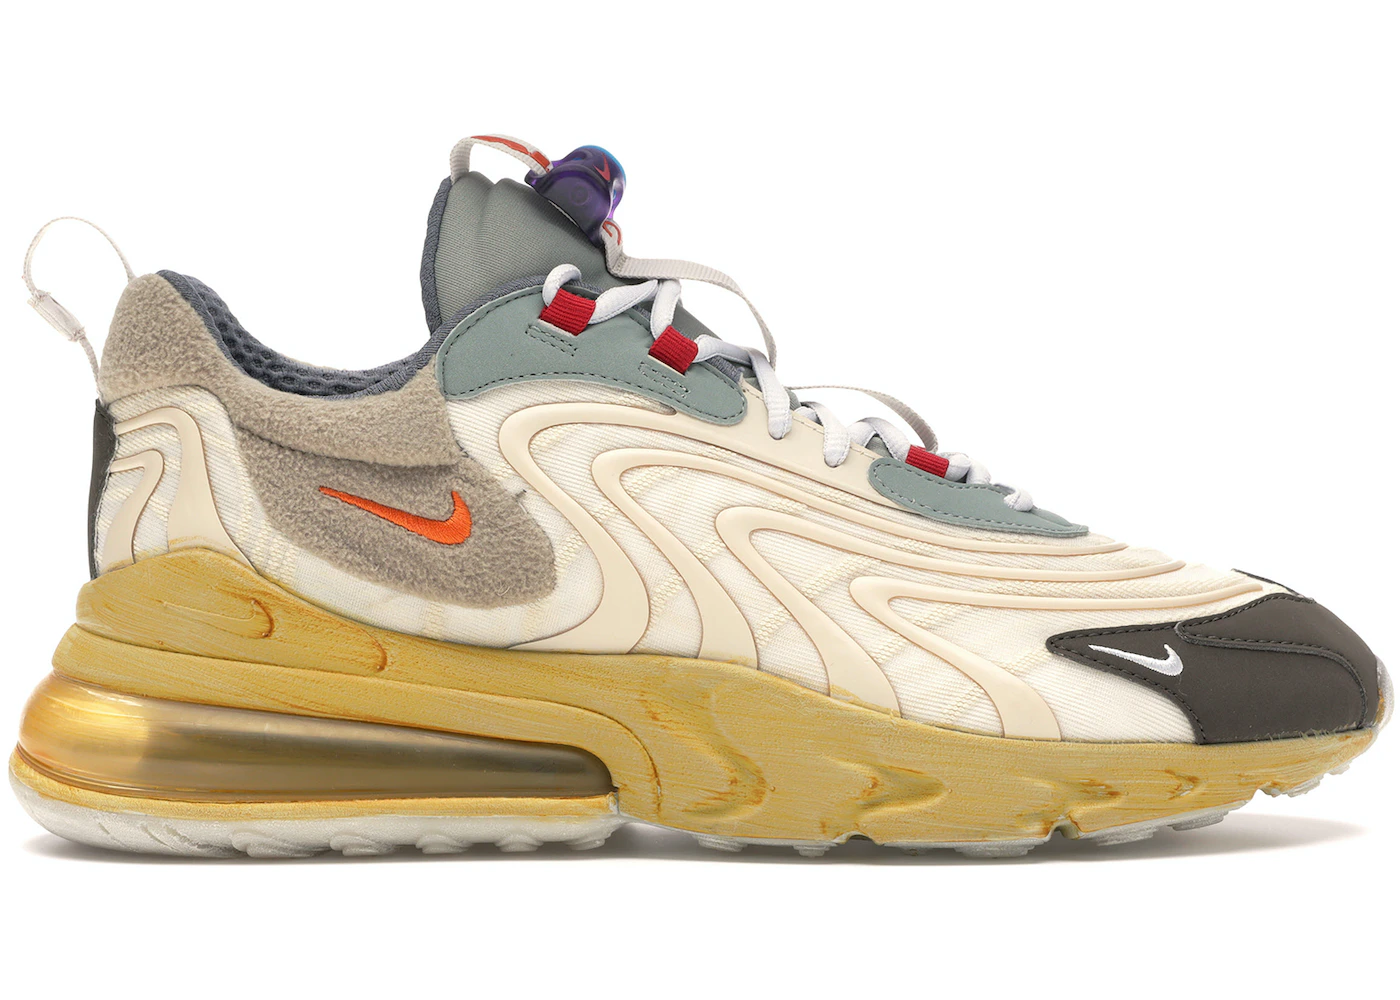 Zwitsers Mechanica helikopter Nike Air Max 270 React ENG Travis Scott Cactus Trails - CT2864-200 - US